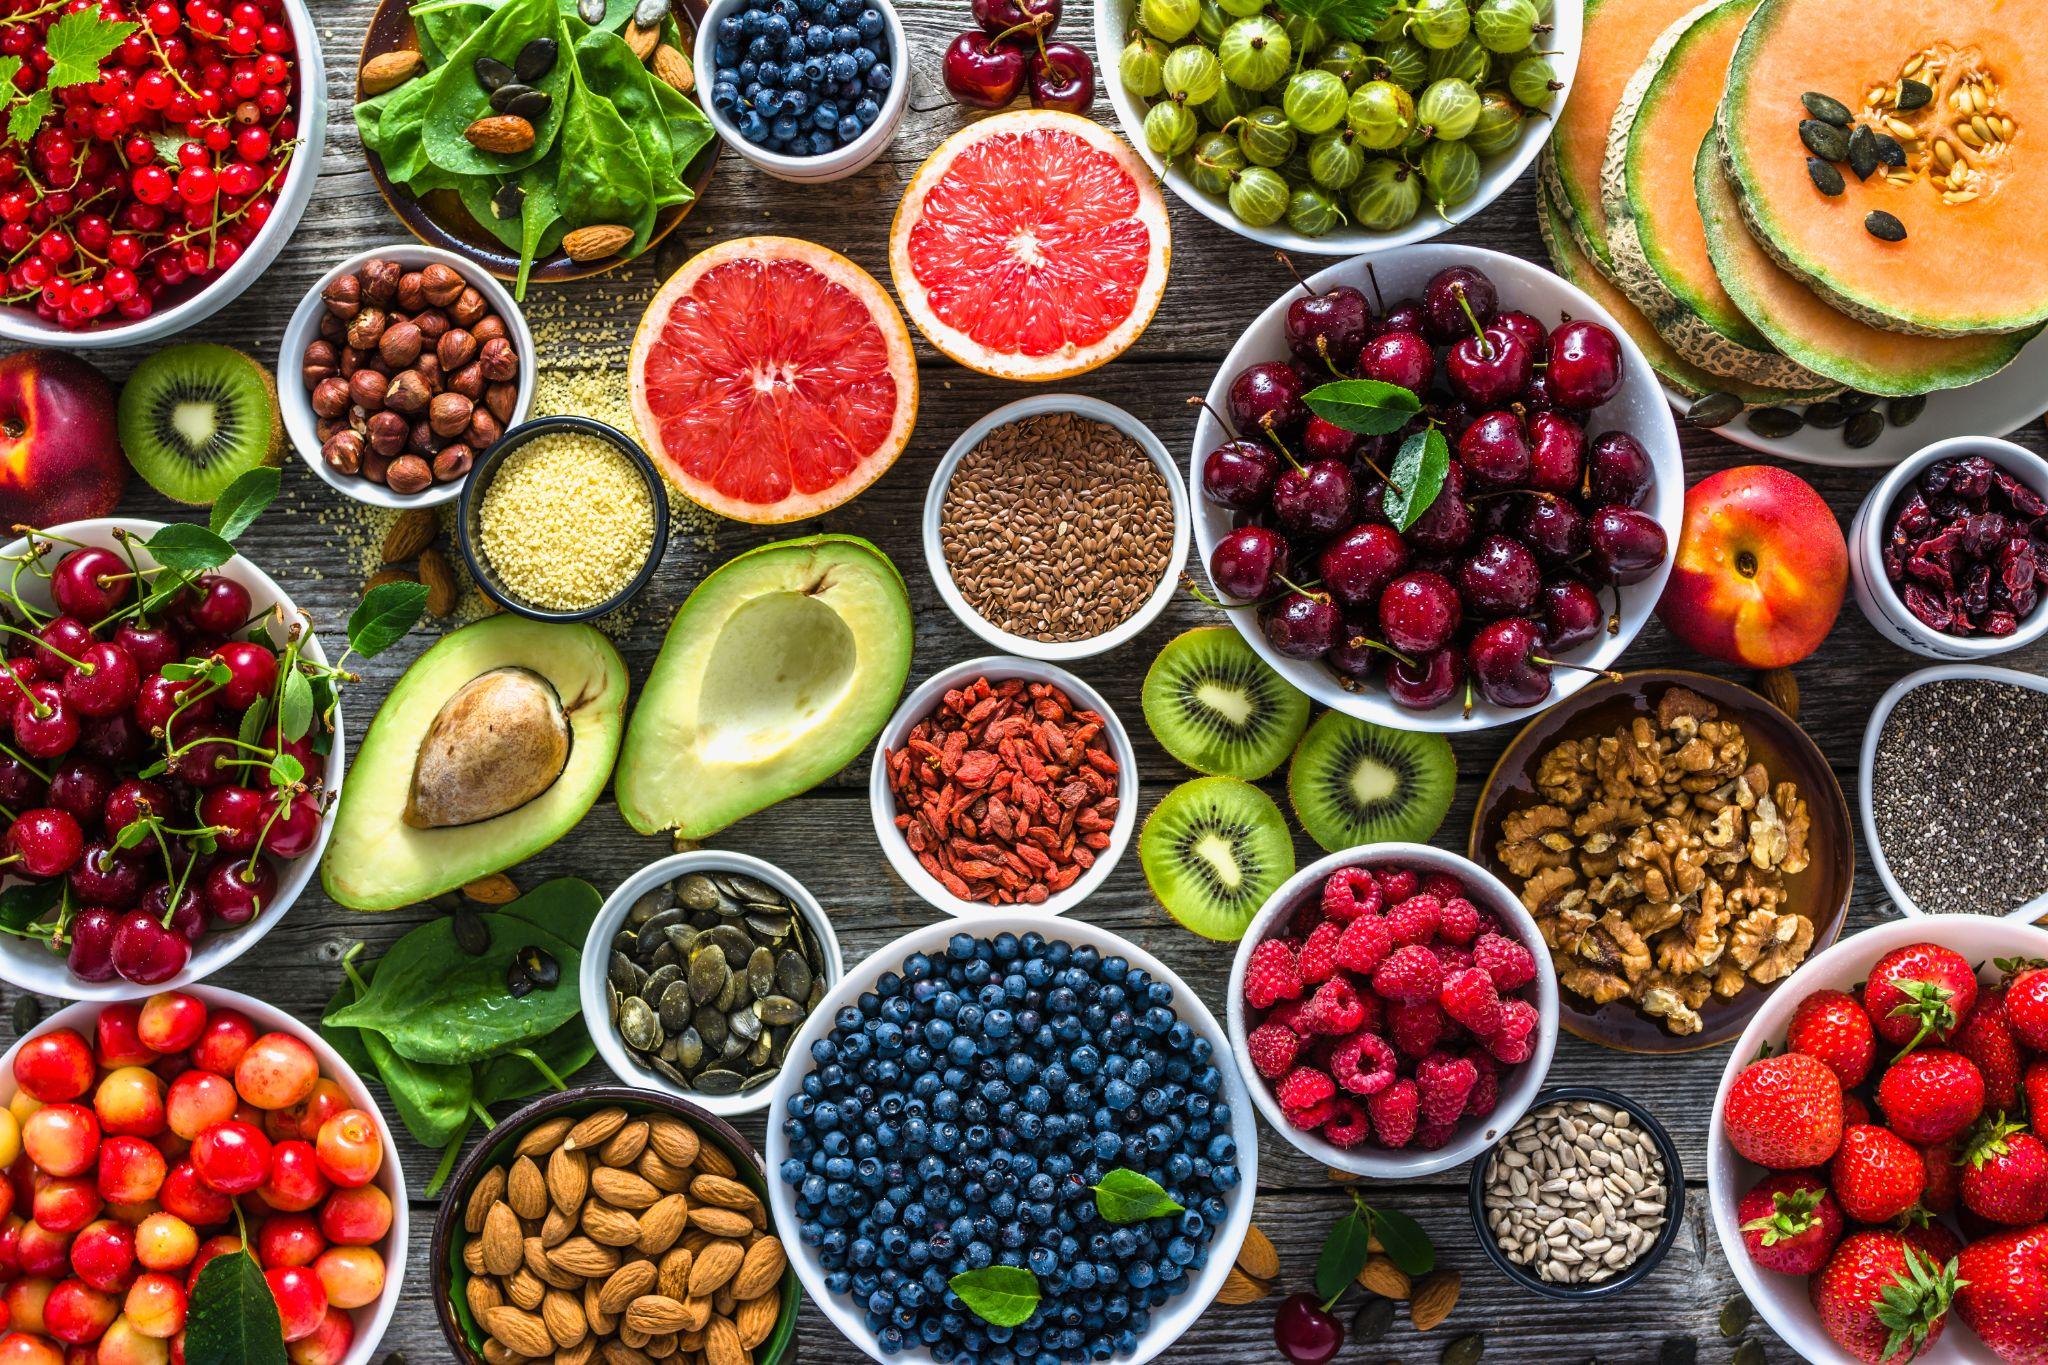 Superfoods, various fruits and assorted berries, nuts and seeds.